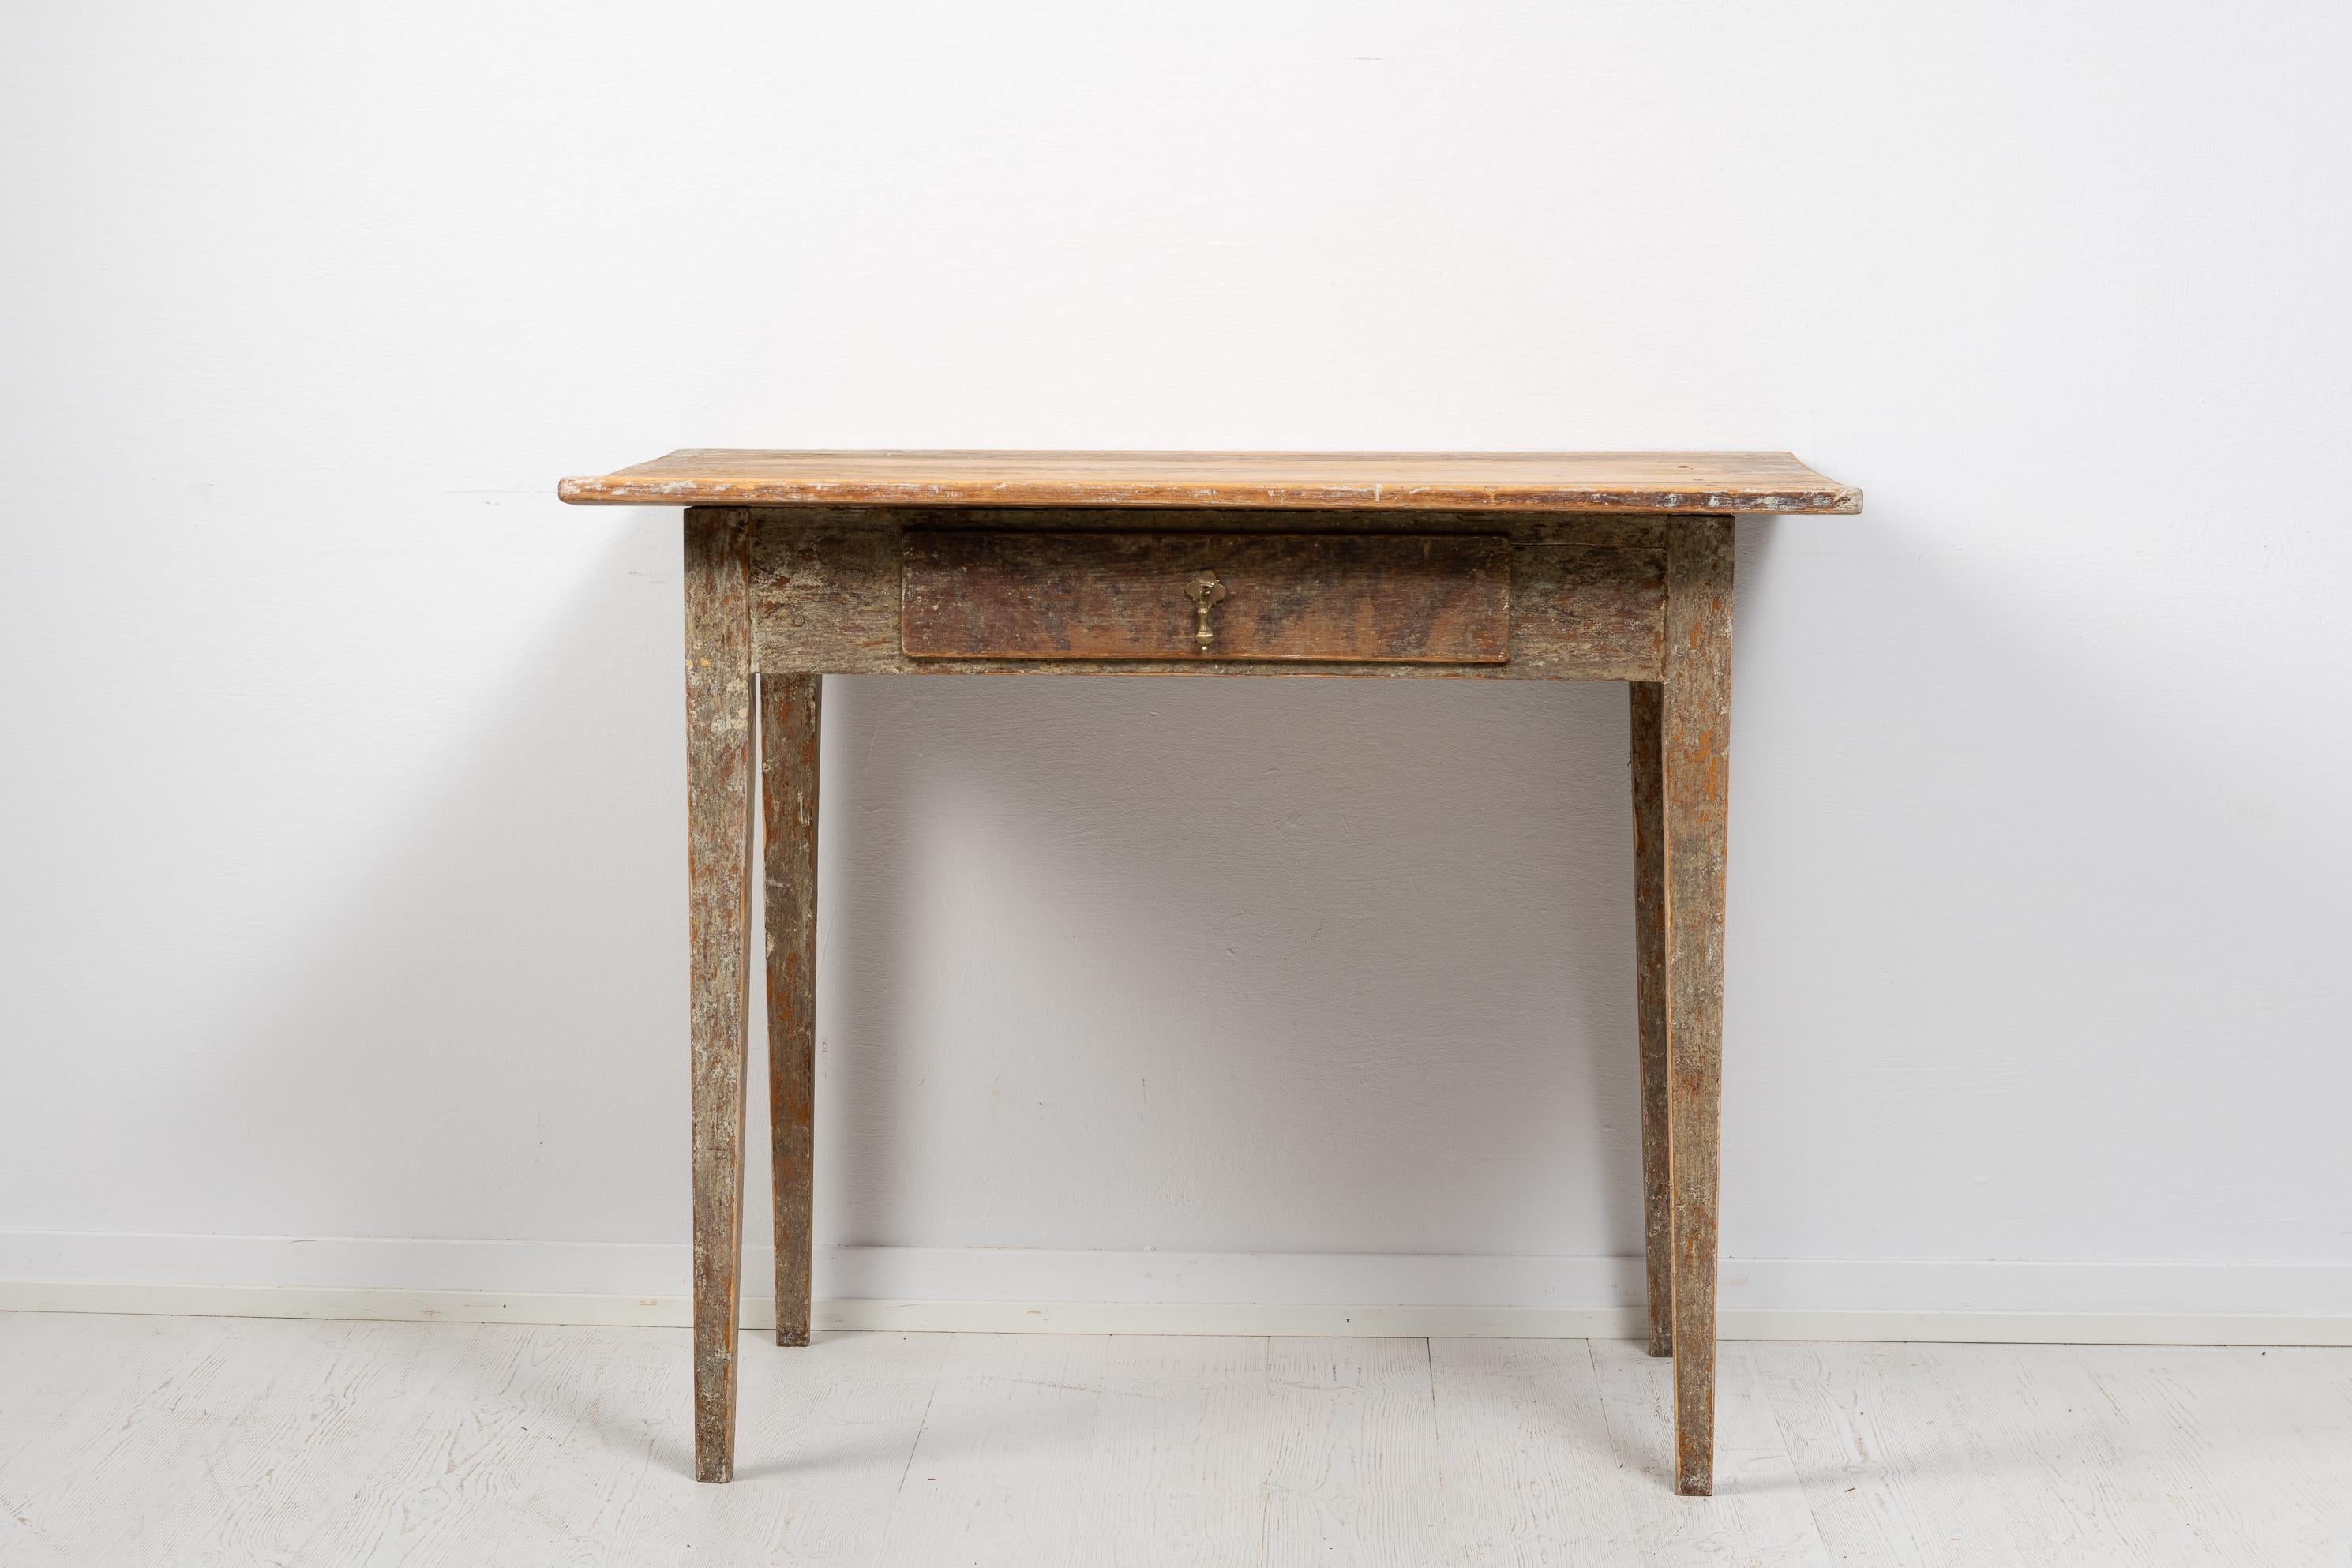 Desk in gustavian style from northern Sweden made during the early 1800s, circa 1820. The desk has straight tapered legs with a single thin drawer. The drawer has an old drawer pull in brass. The desk has been dry scraped by hand to traces of the